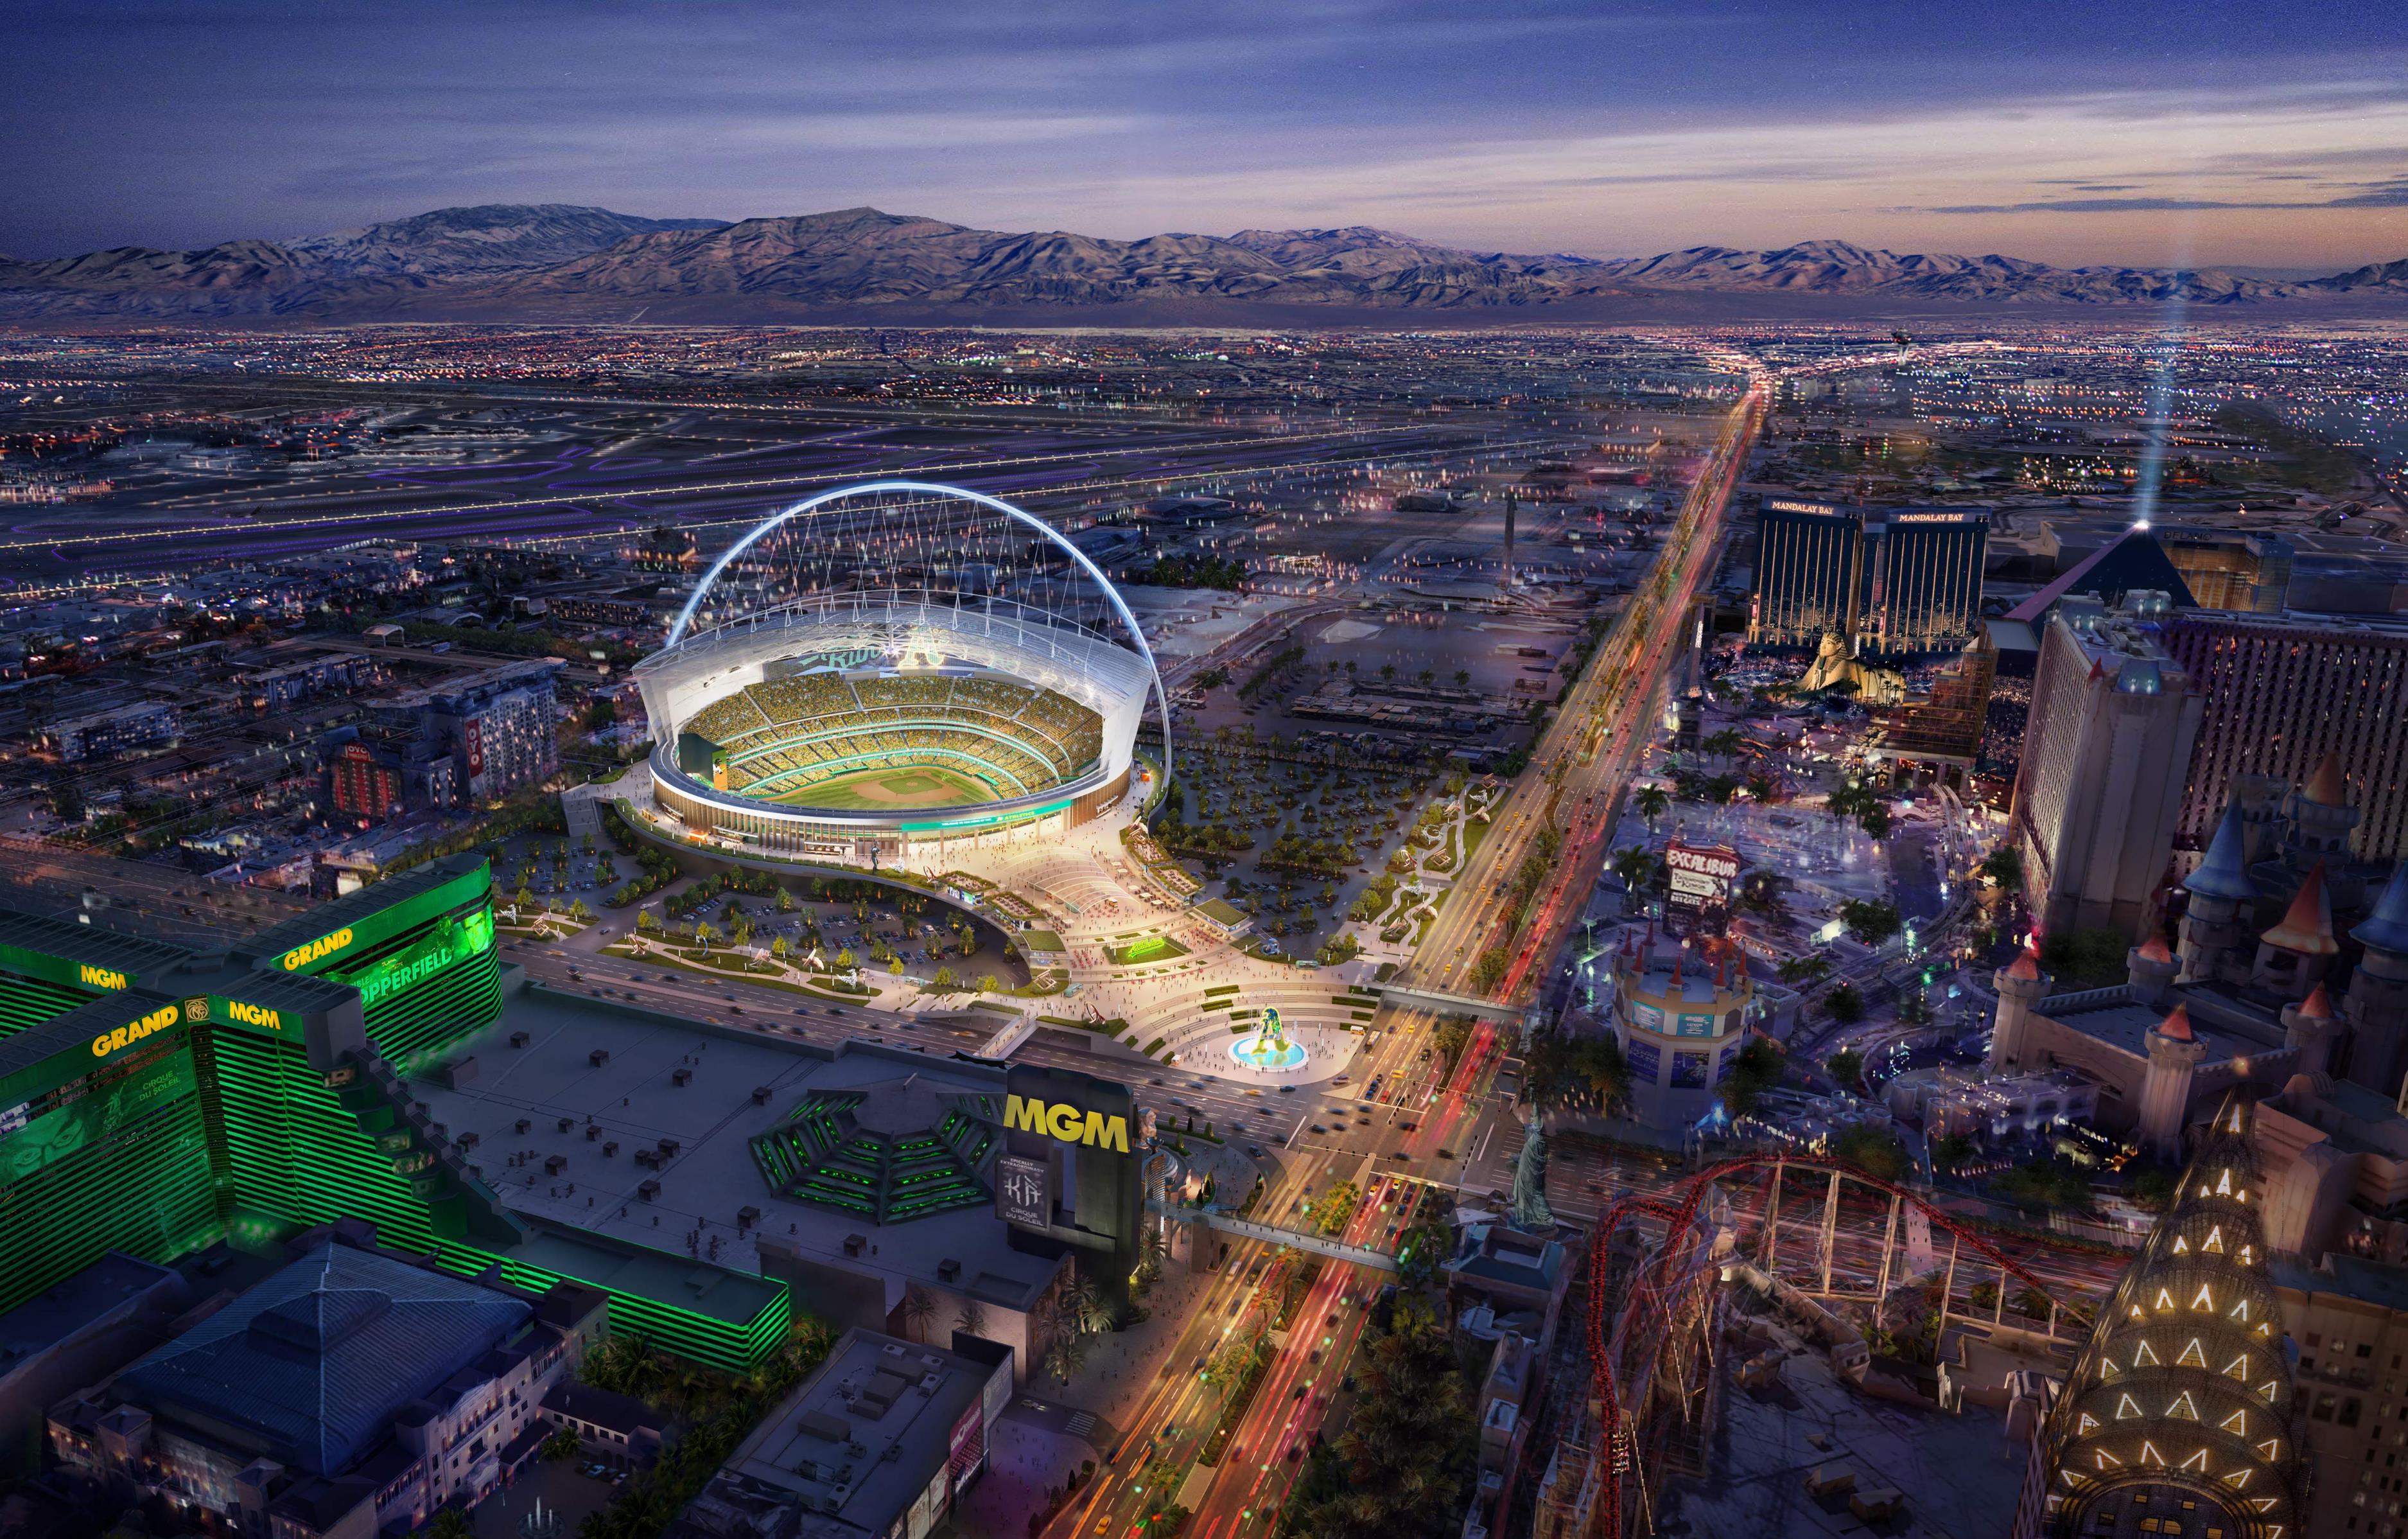 Governor signs public funding bill for new A's ballpark in Las Vegas,  growing global sports destination